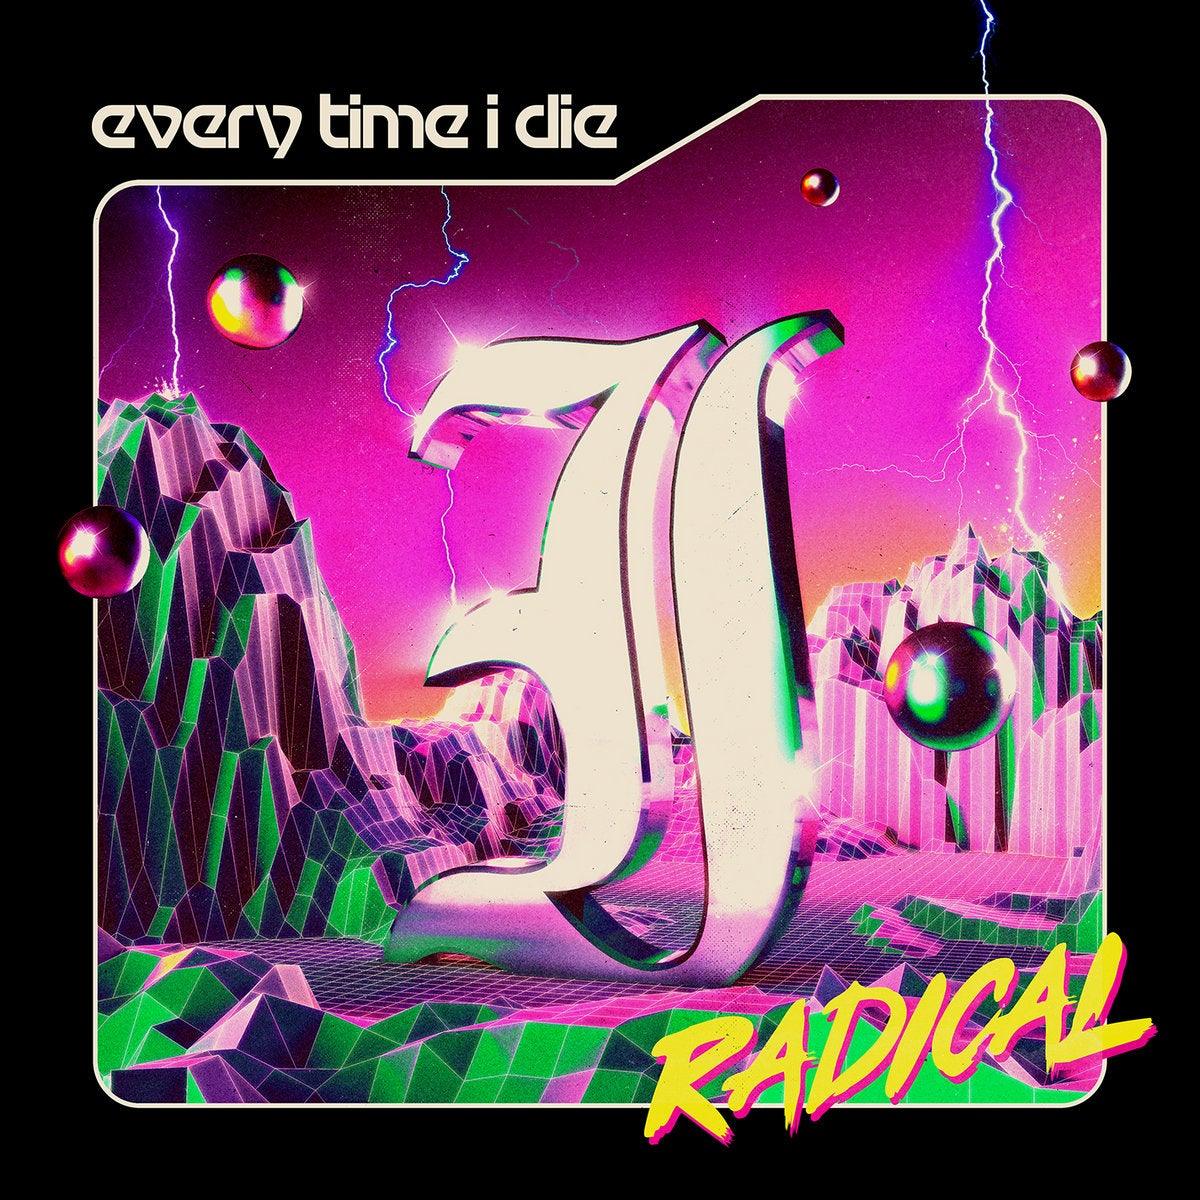 Buy – Every Time I Die "Radical" CD – Band & Music Merch – Cold Cuts Merch